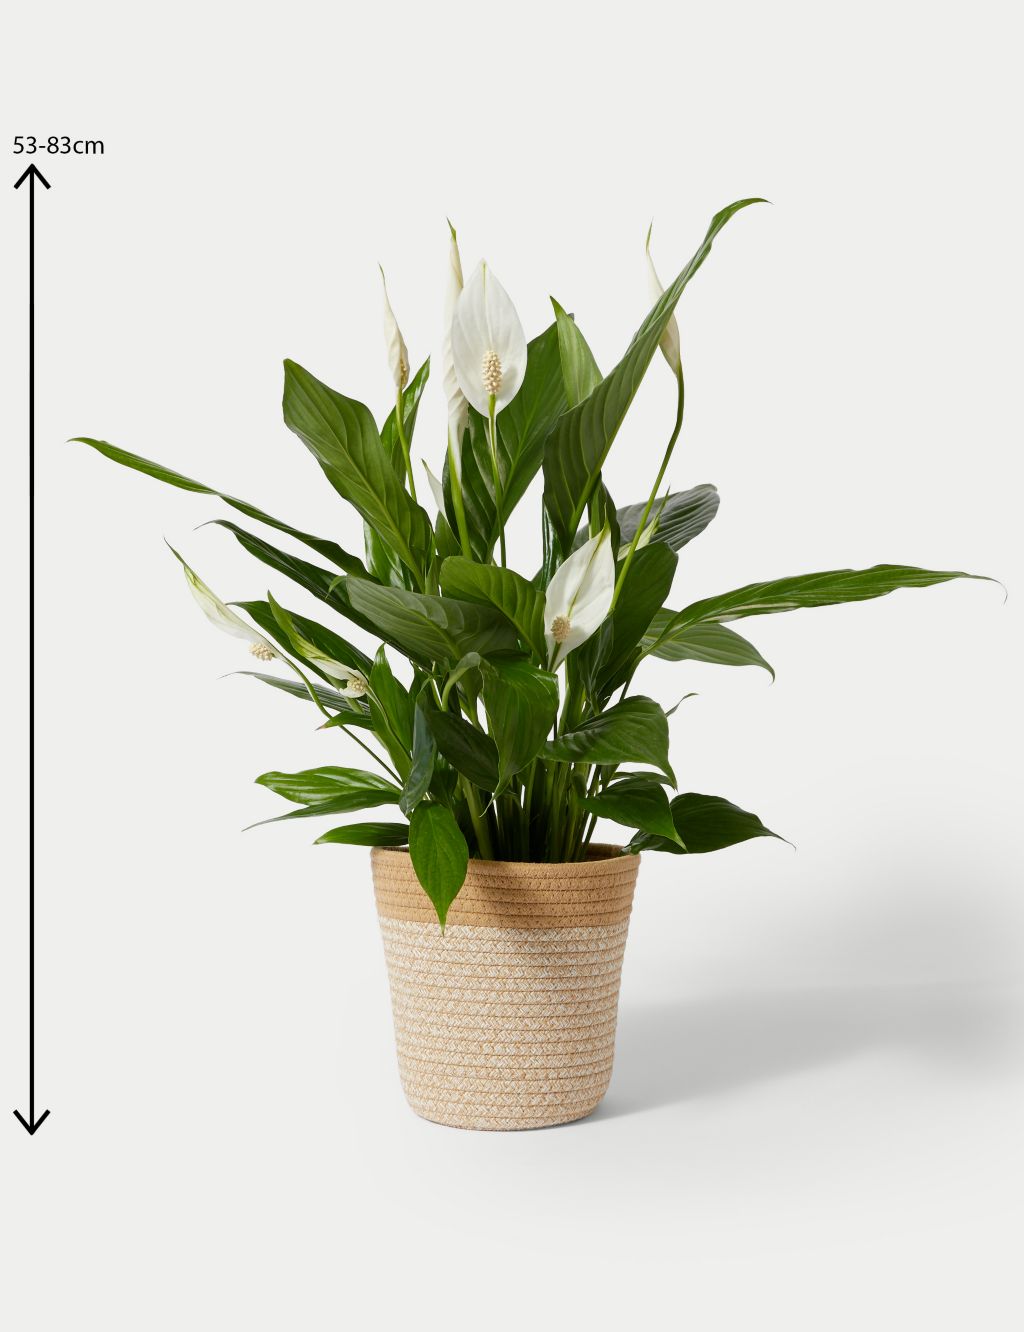 Large Peace Lily in Basket image 4